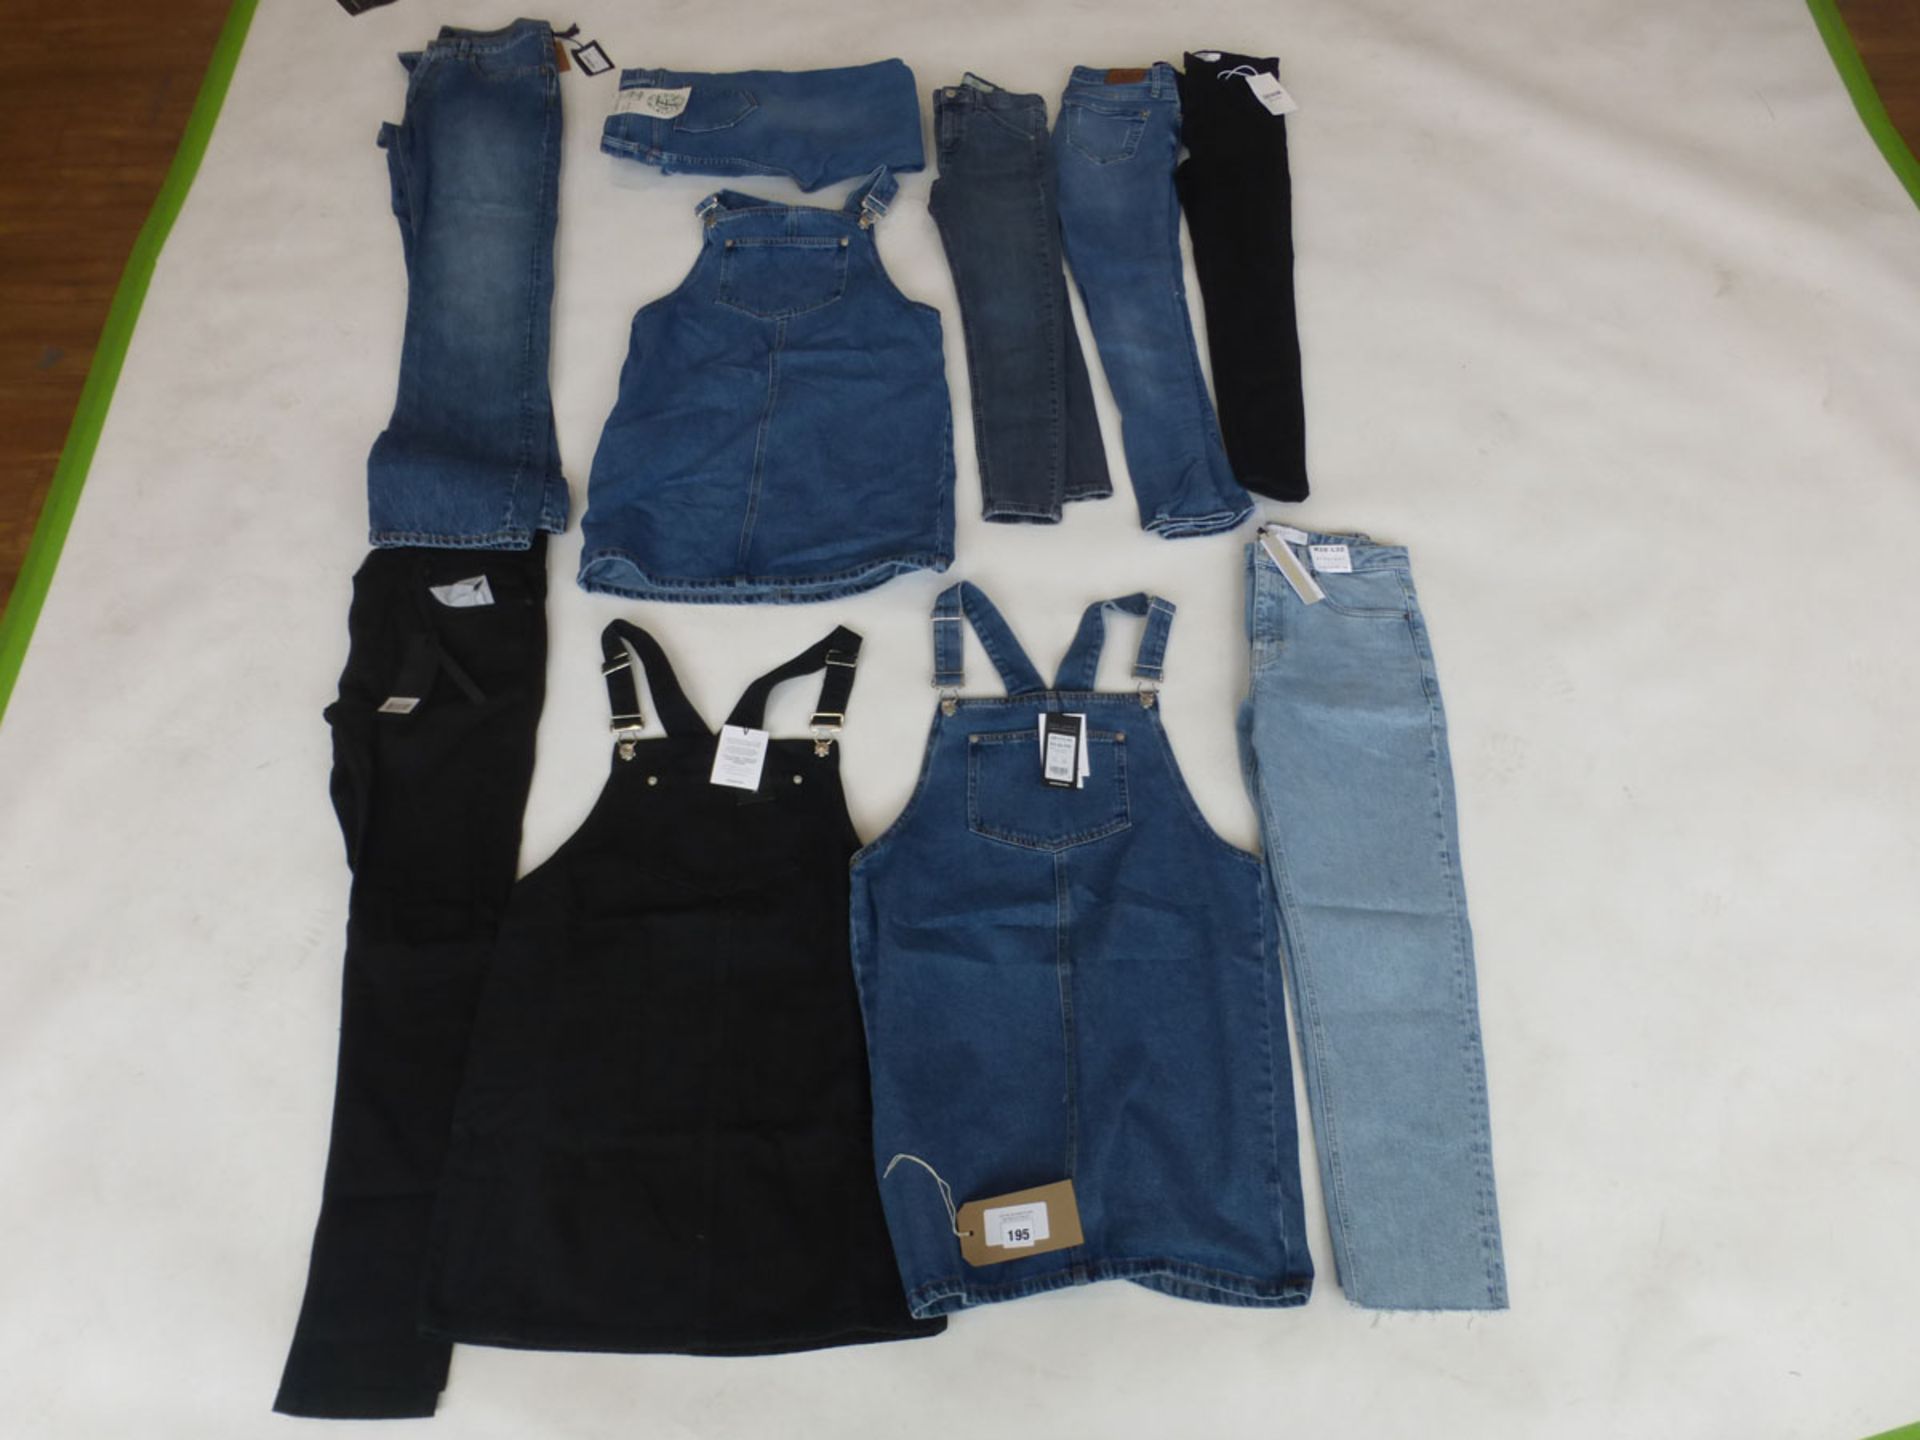 Selection of denim wear to include New Look, River Island, Topshop, etc